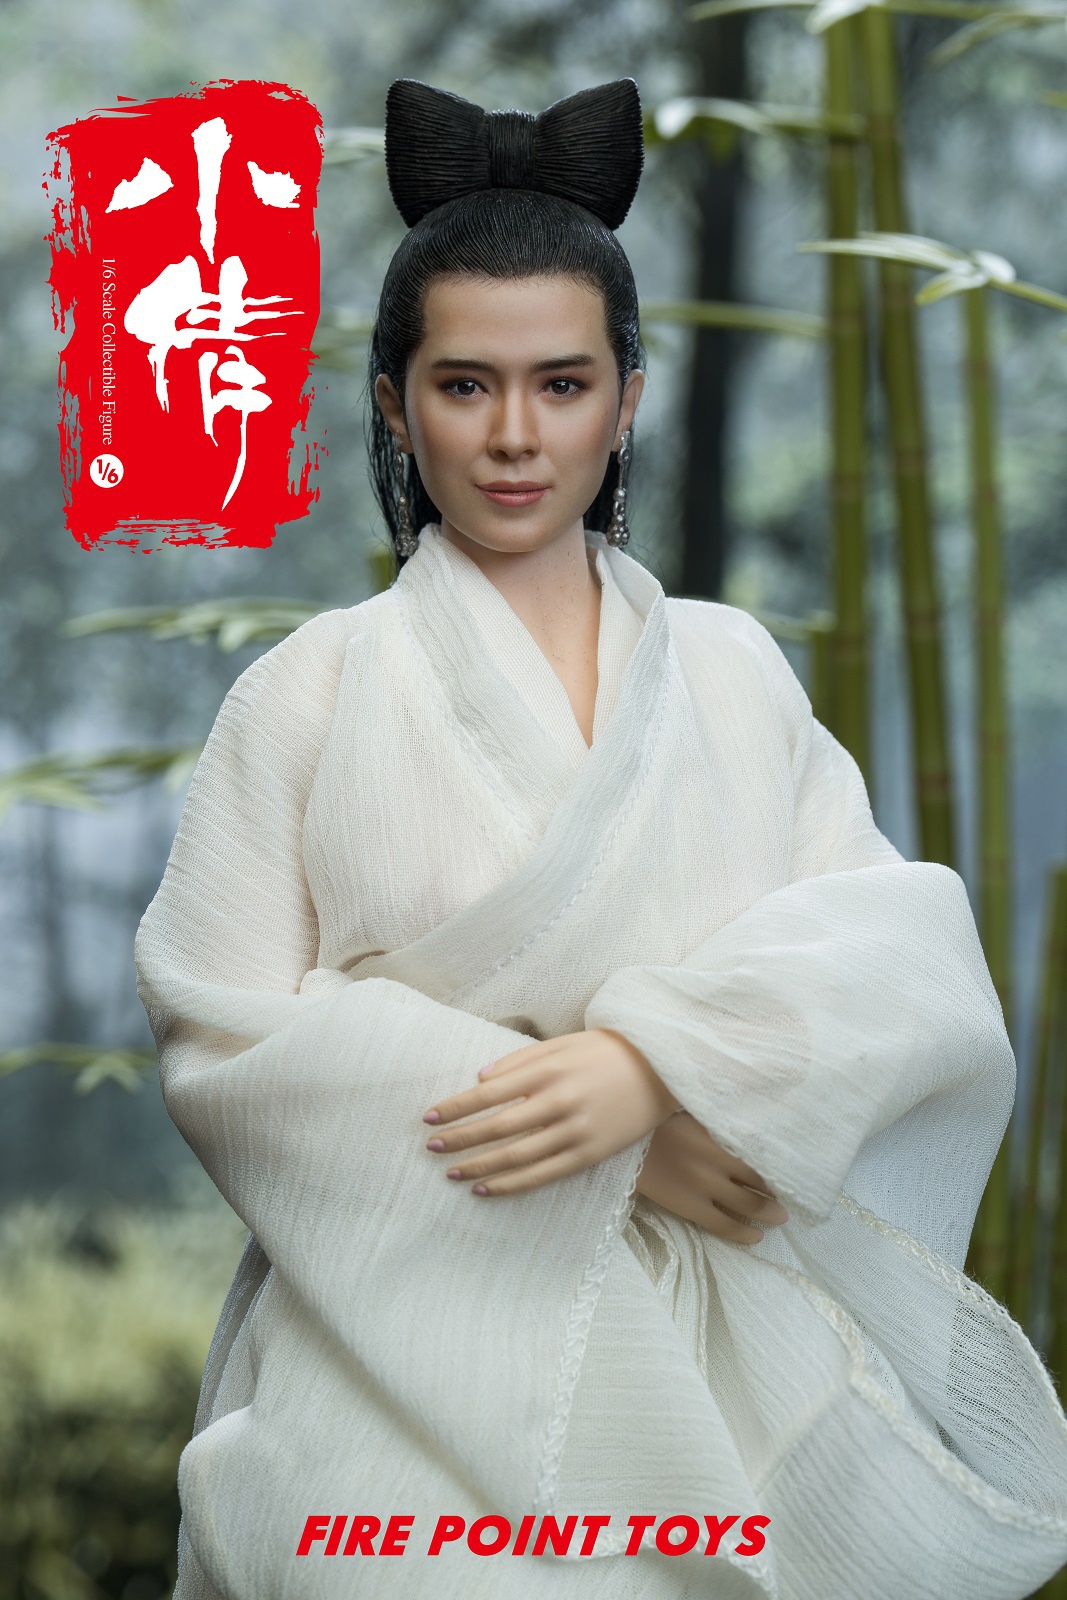 FirePointToys - NEW PRODUCT: Fire Point Toys - Xiaoqian (FPT003) 0850